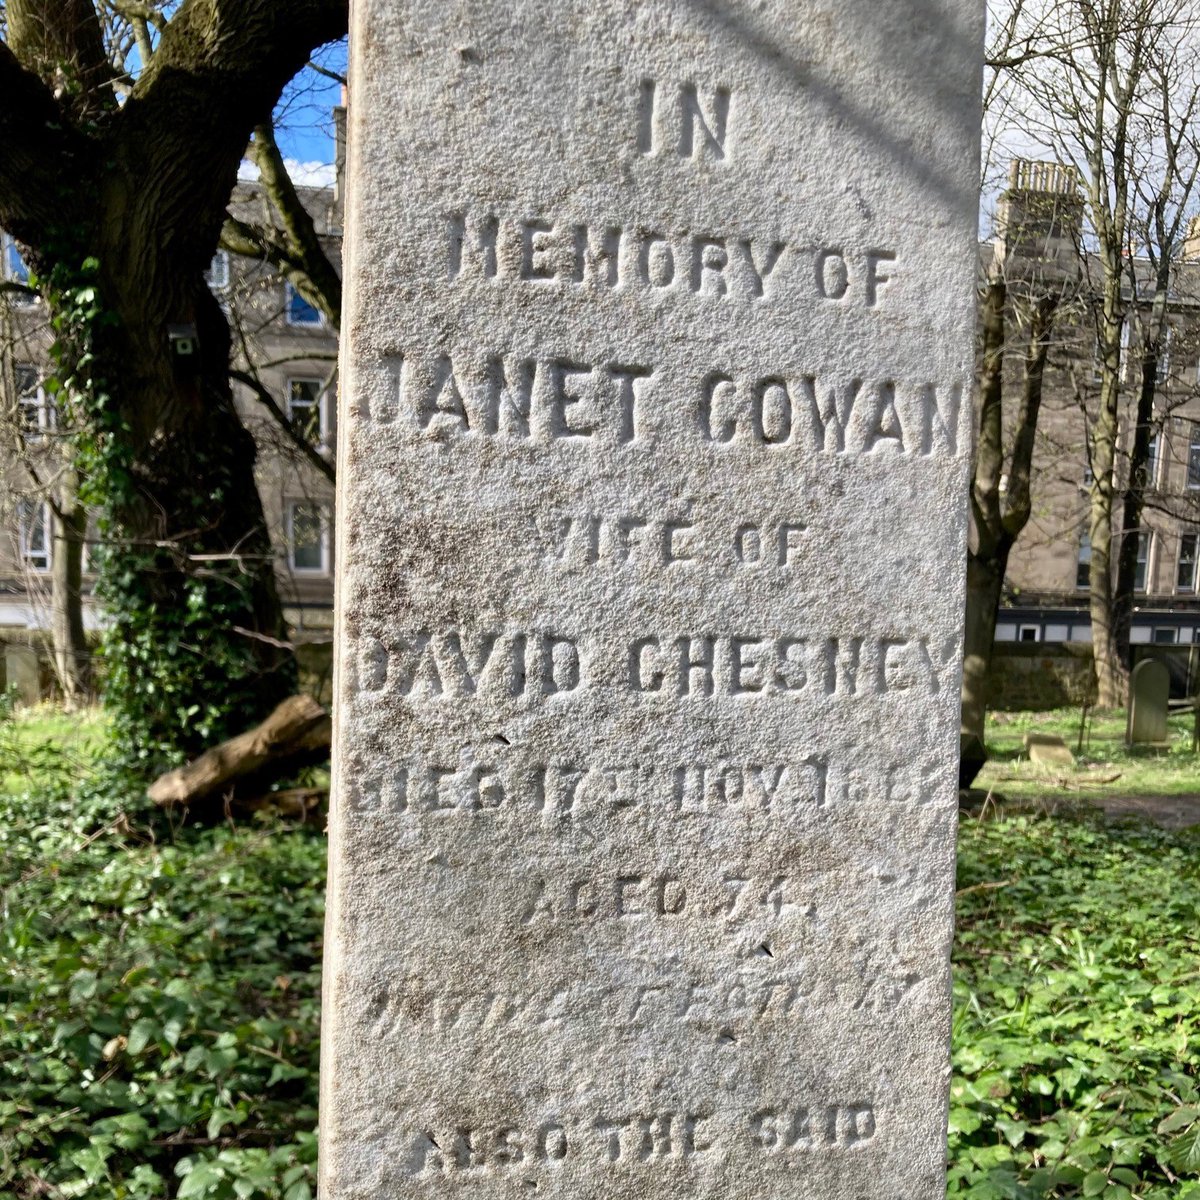 Janet and David Chesney, the last residents of Mary King’s Close, now have their gravestone restored to its former glory thanks to dedicated volunteers of @dalrycemetery! Check our latest blog article to learn more - realmarykingsclose.com/blog/iconic-ma…